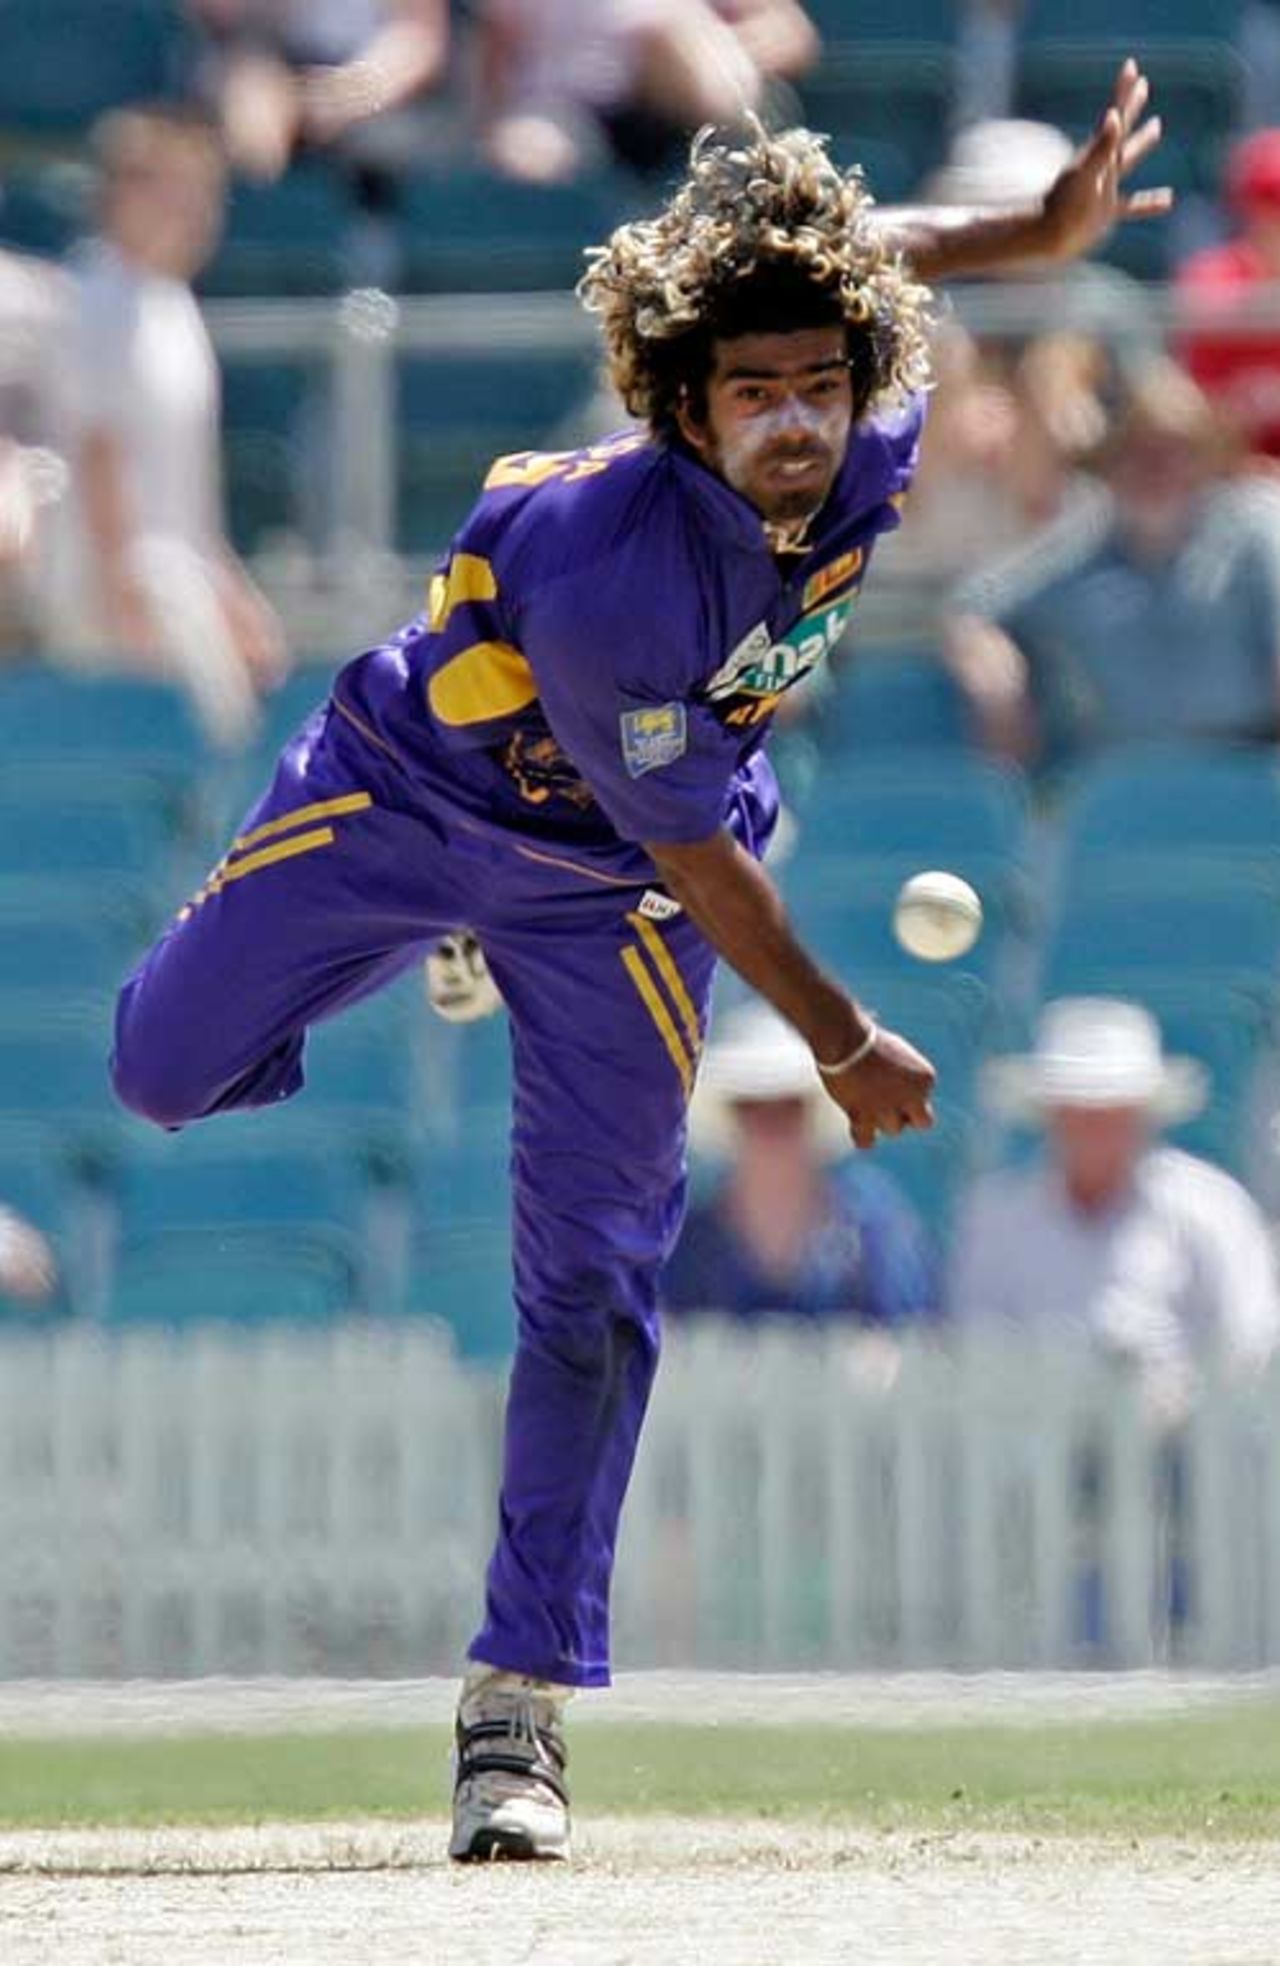 Lasith Malinga collected three wickets, Prime Minister's XI v Sri Lankans, Tour match, Canberra, January 30, 2008